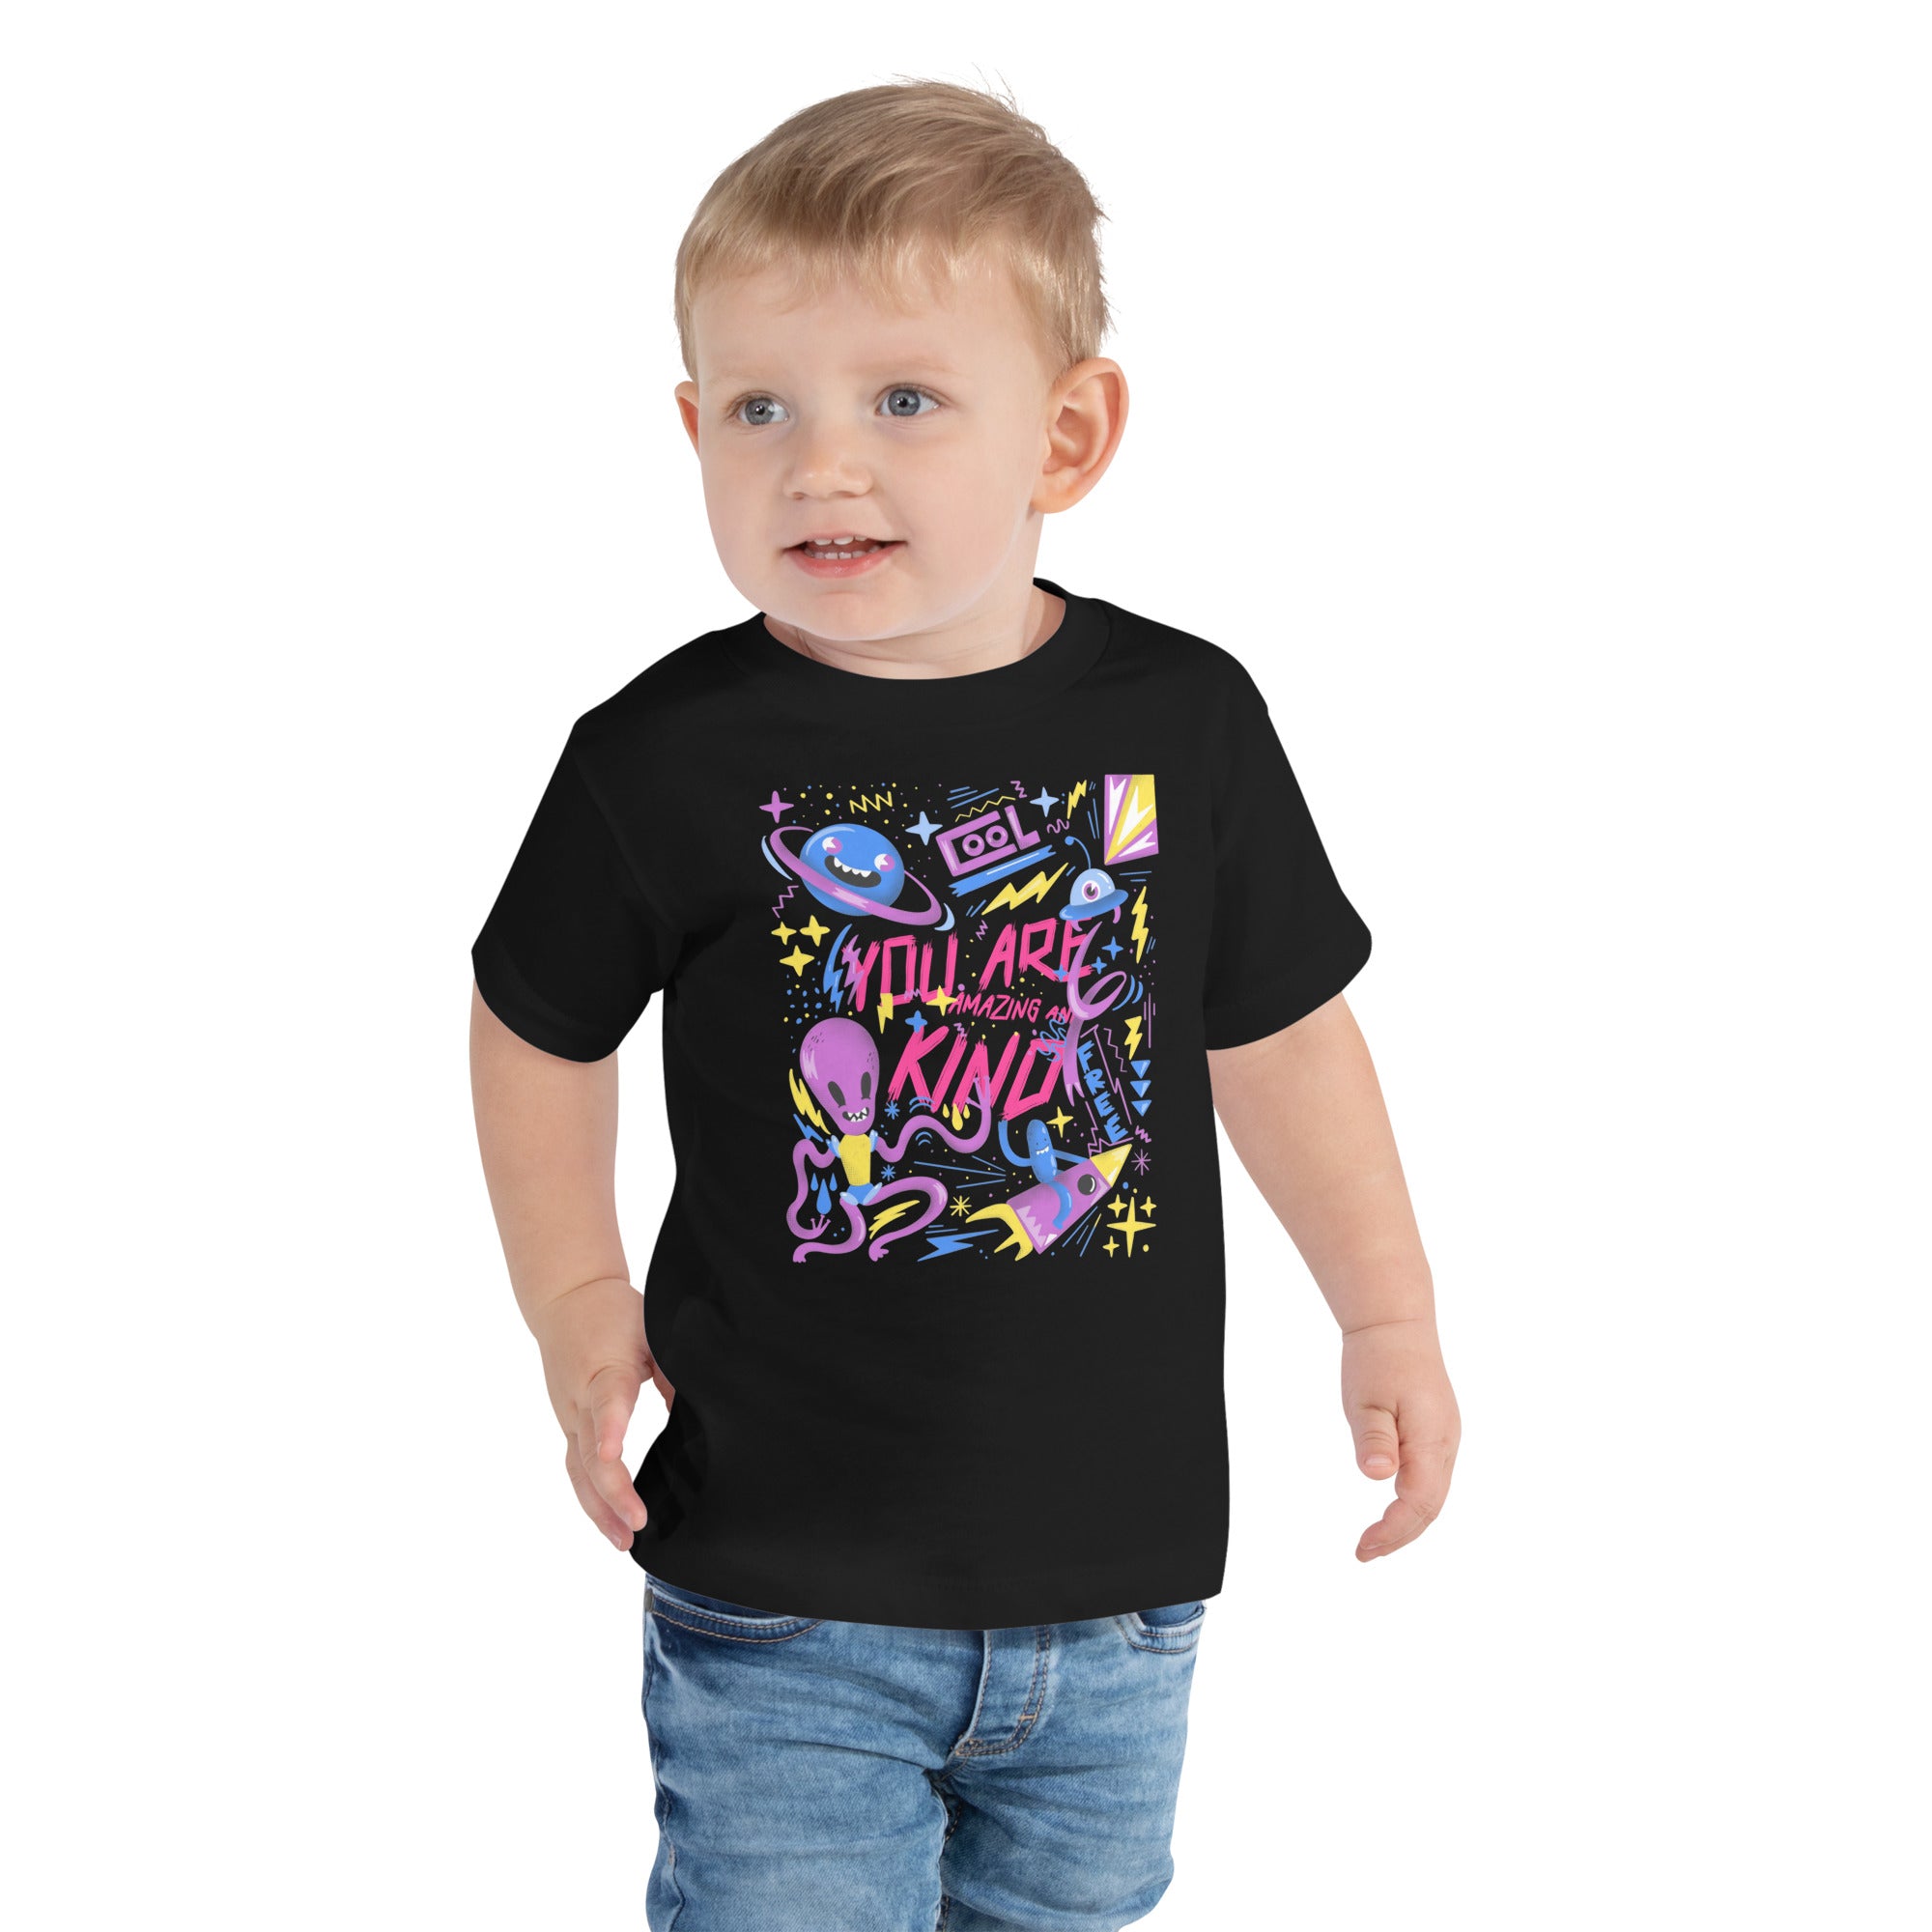 You Are Amazing and Kind Toddler Short Sleeve Tee Black / 3T